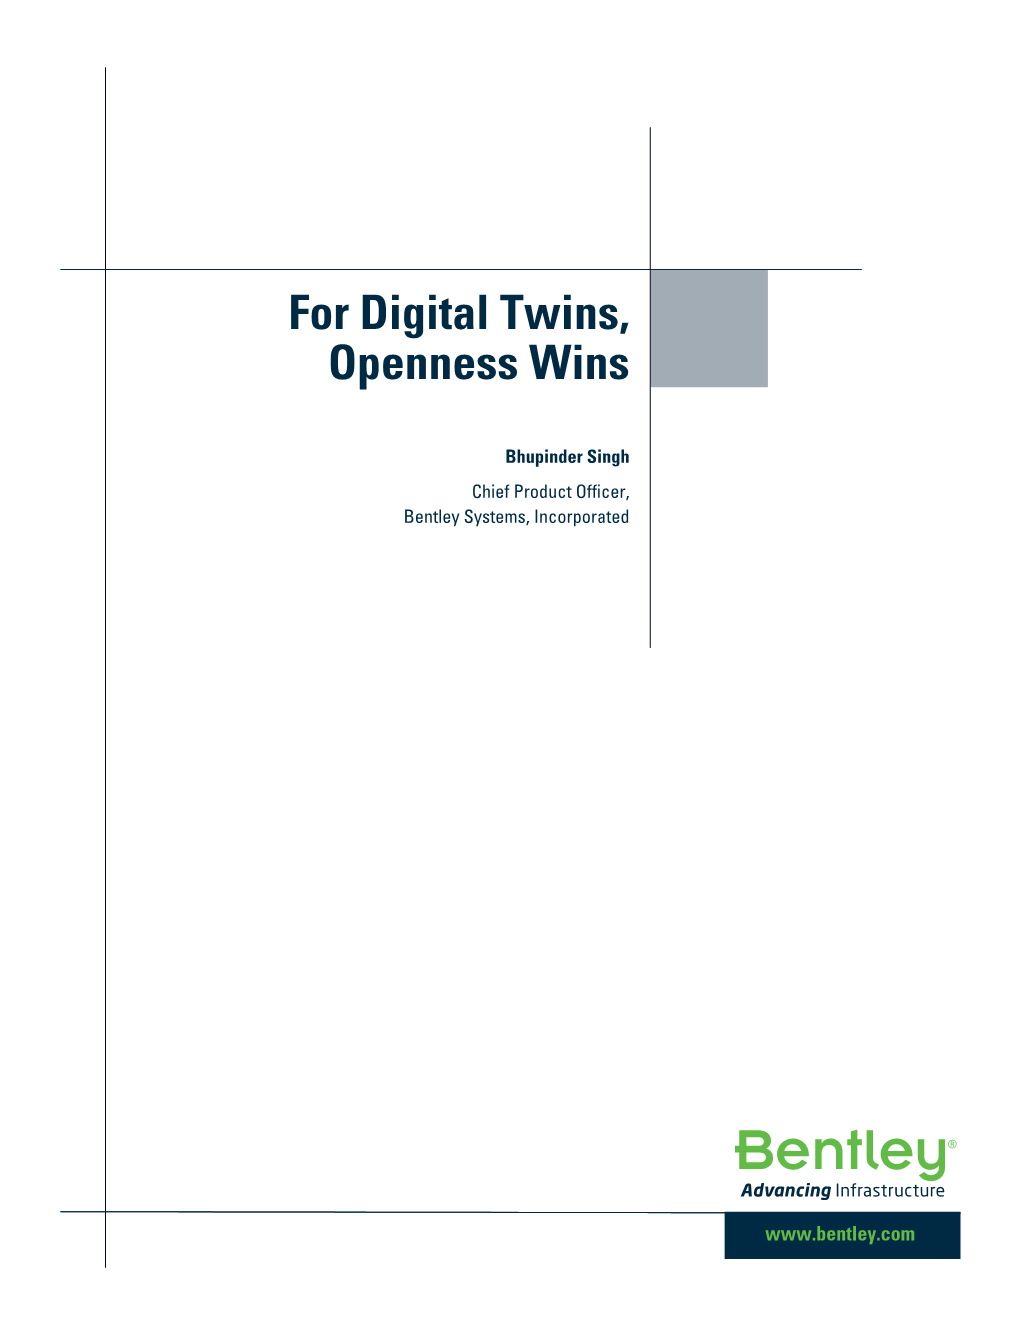 For Digital Twins, Openness Wins